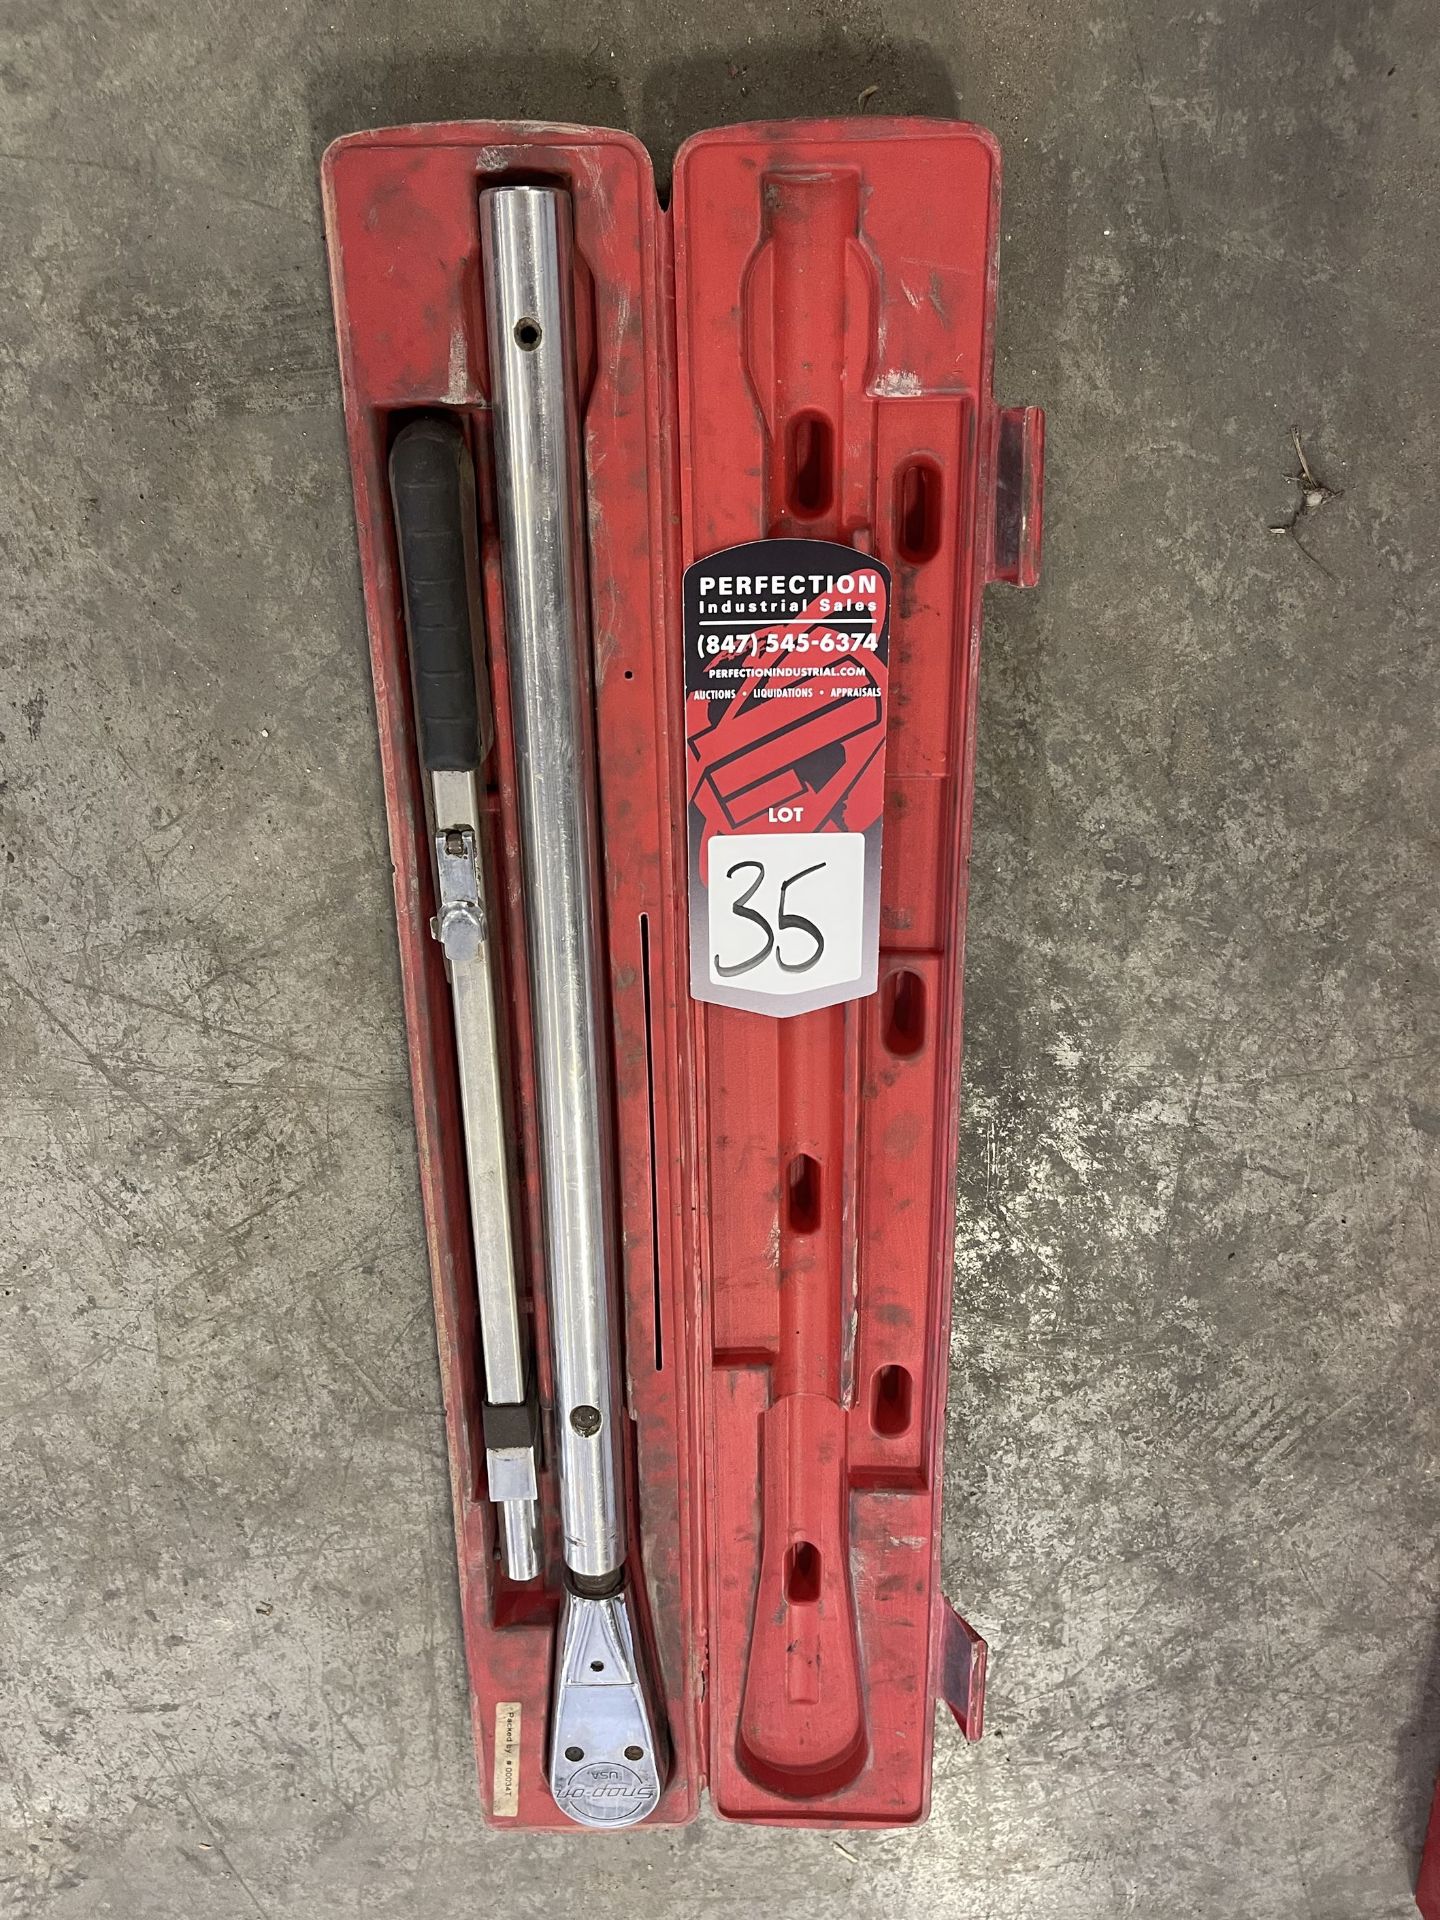 SNAP-ON 200-600 Ft Lb. Torque Wrench - Image 2 of 2